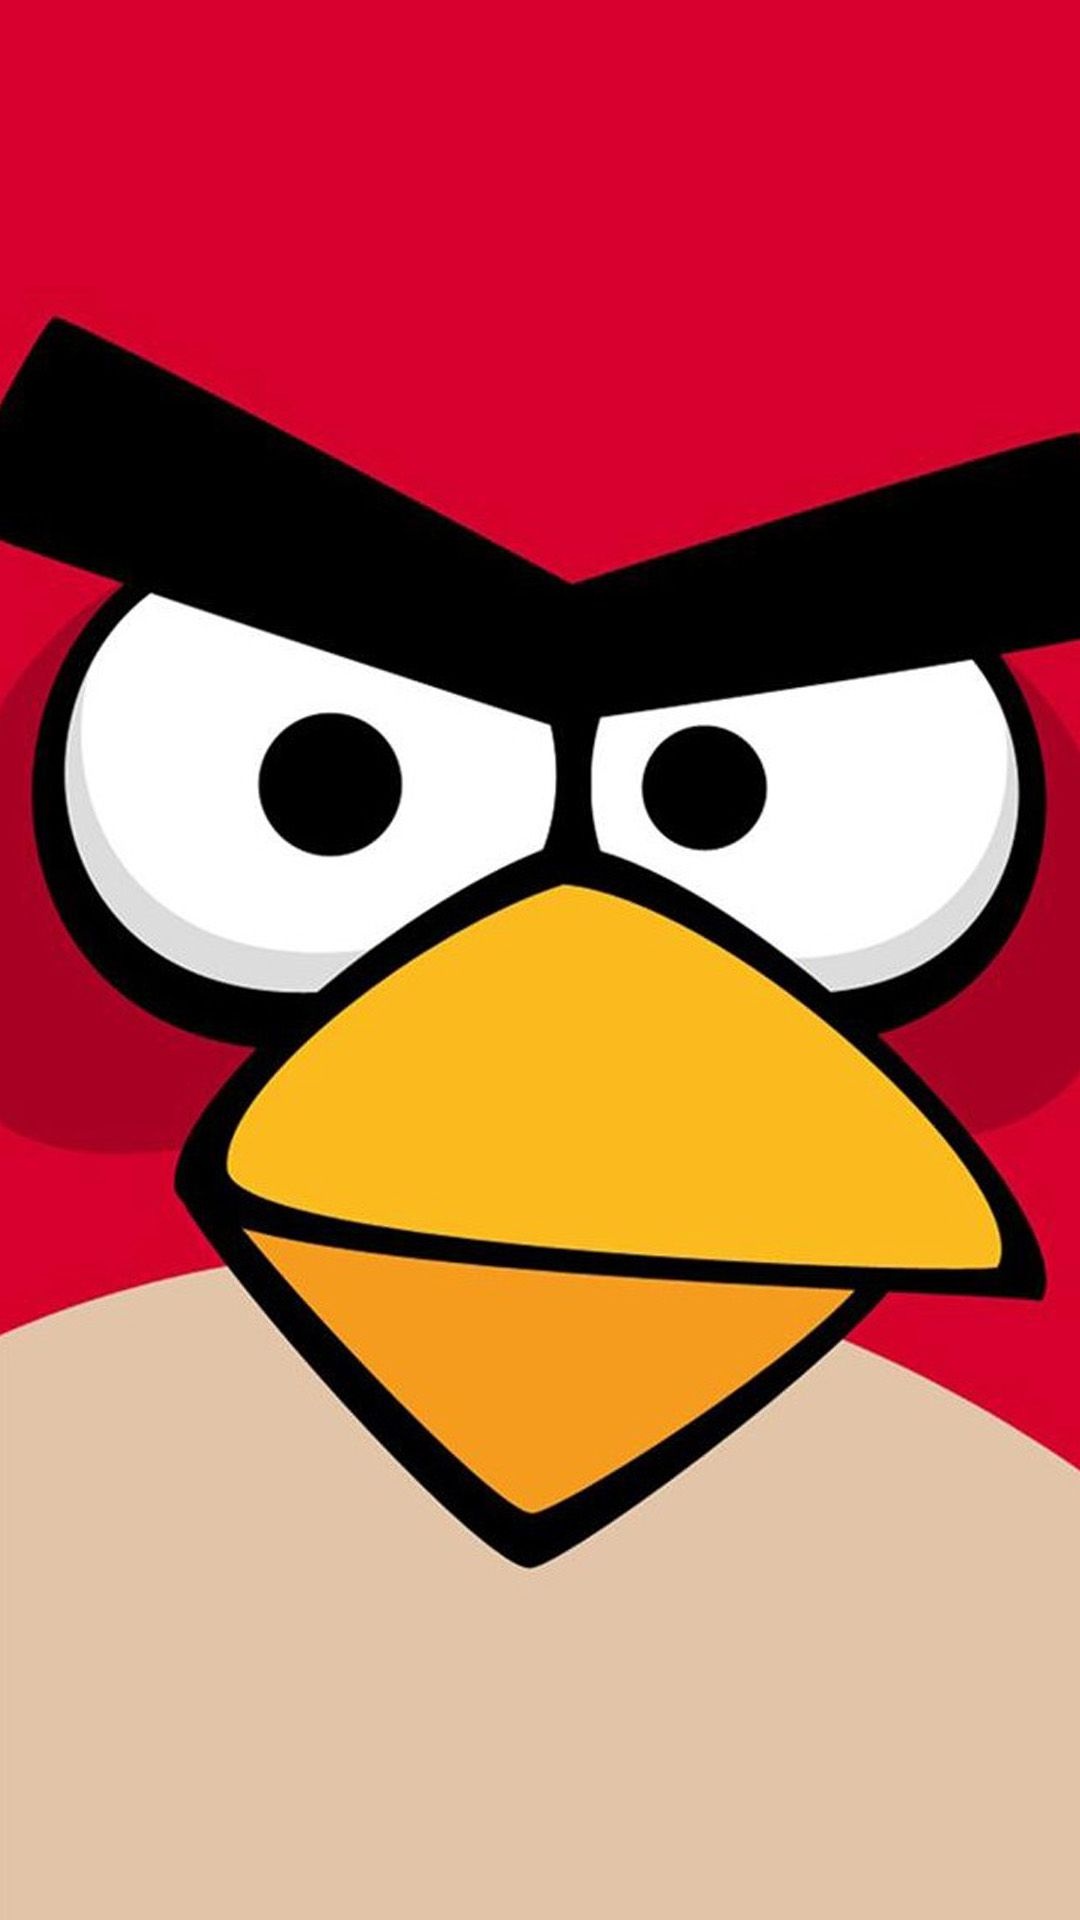 Angry Birds game background, iPhone wallpaper, Stop-motion art, Bird characters, 1080x1920 Full HD Phone